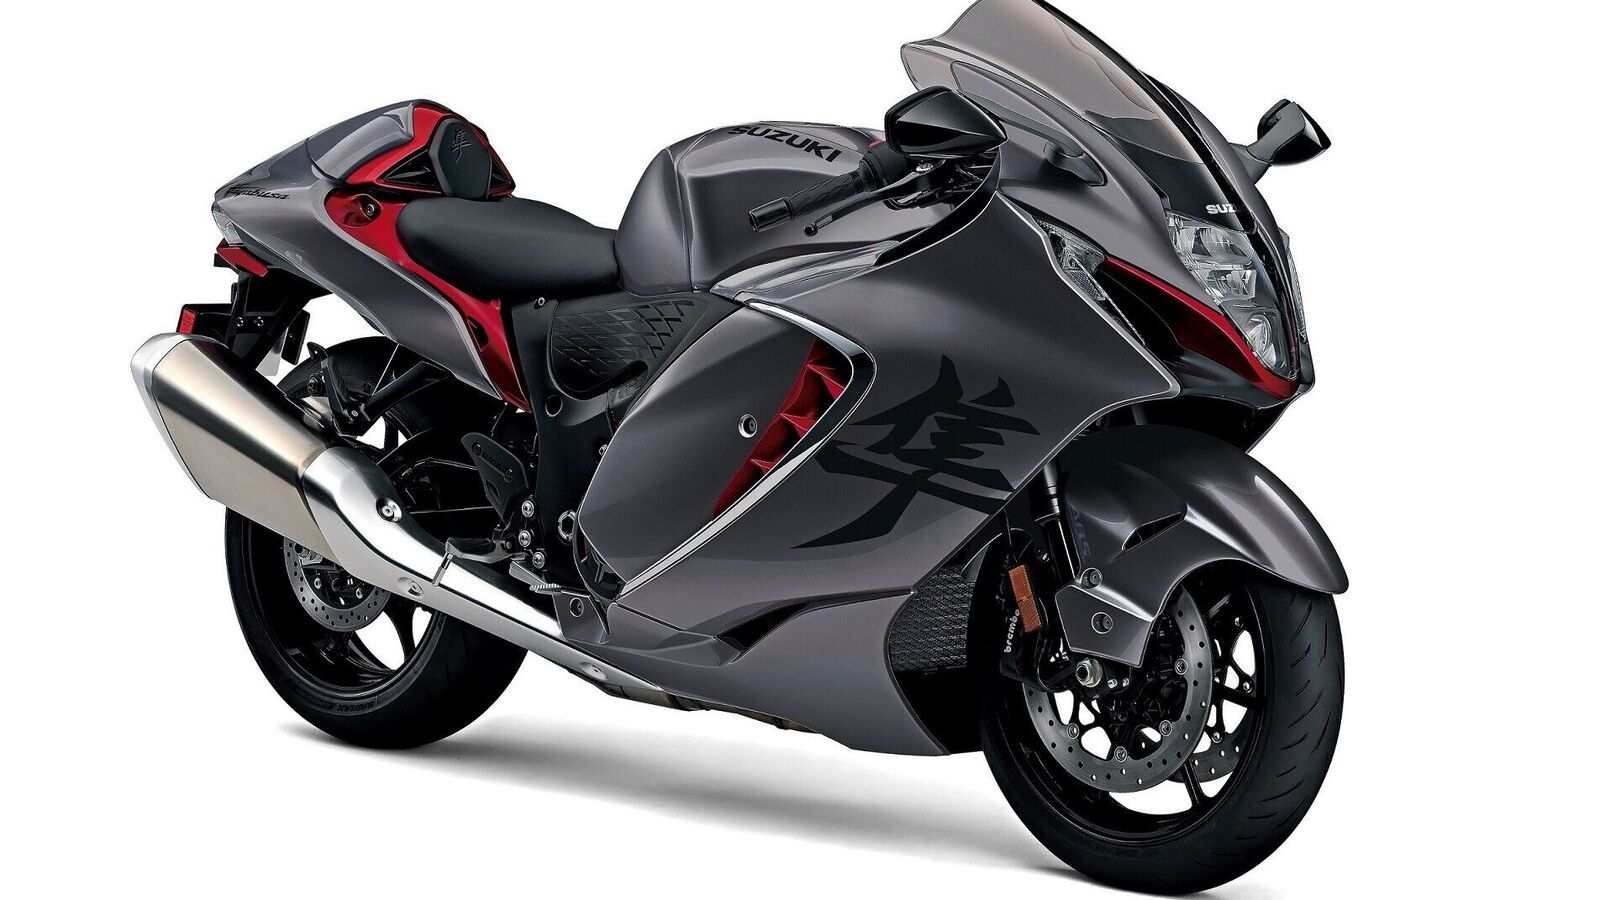 2023 Suzuki Hayabusa launched with OBD2 compliance and three new